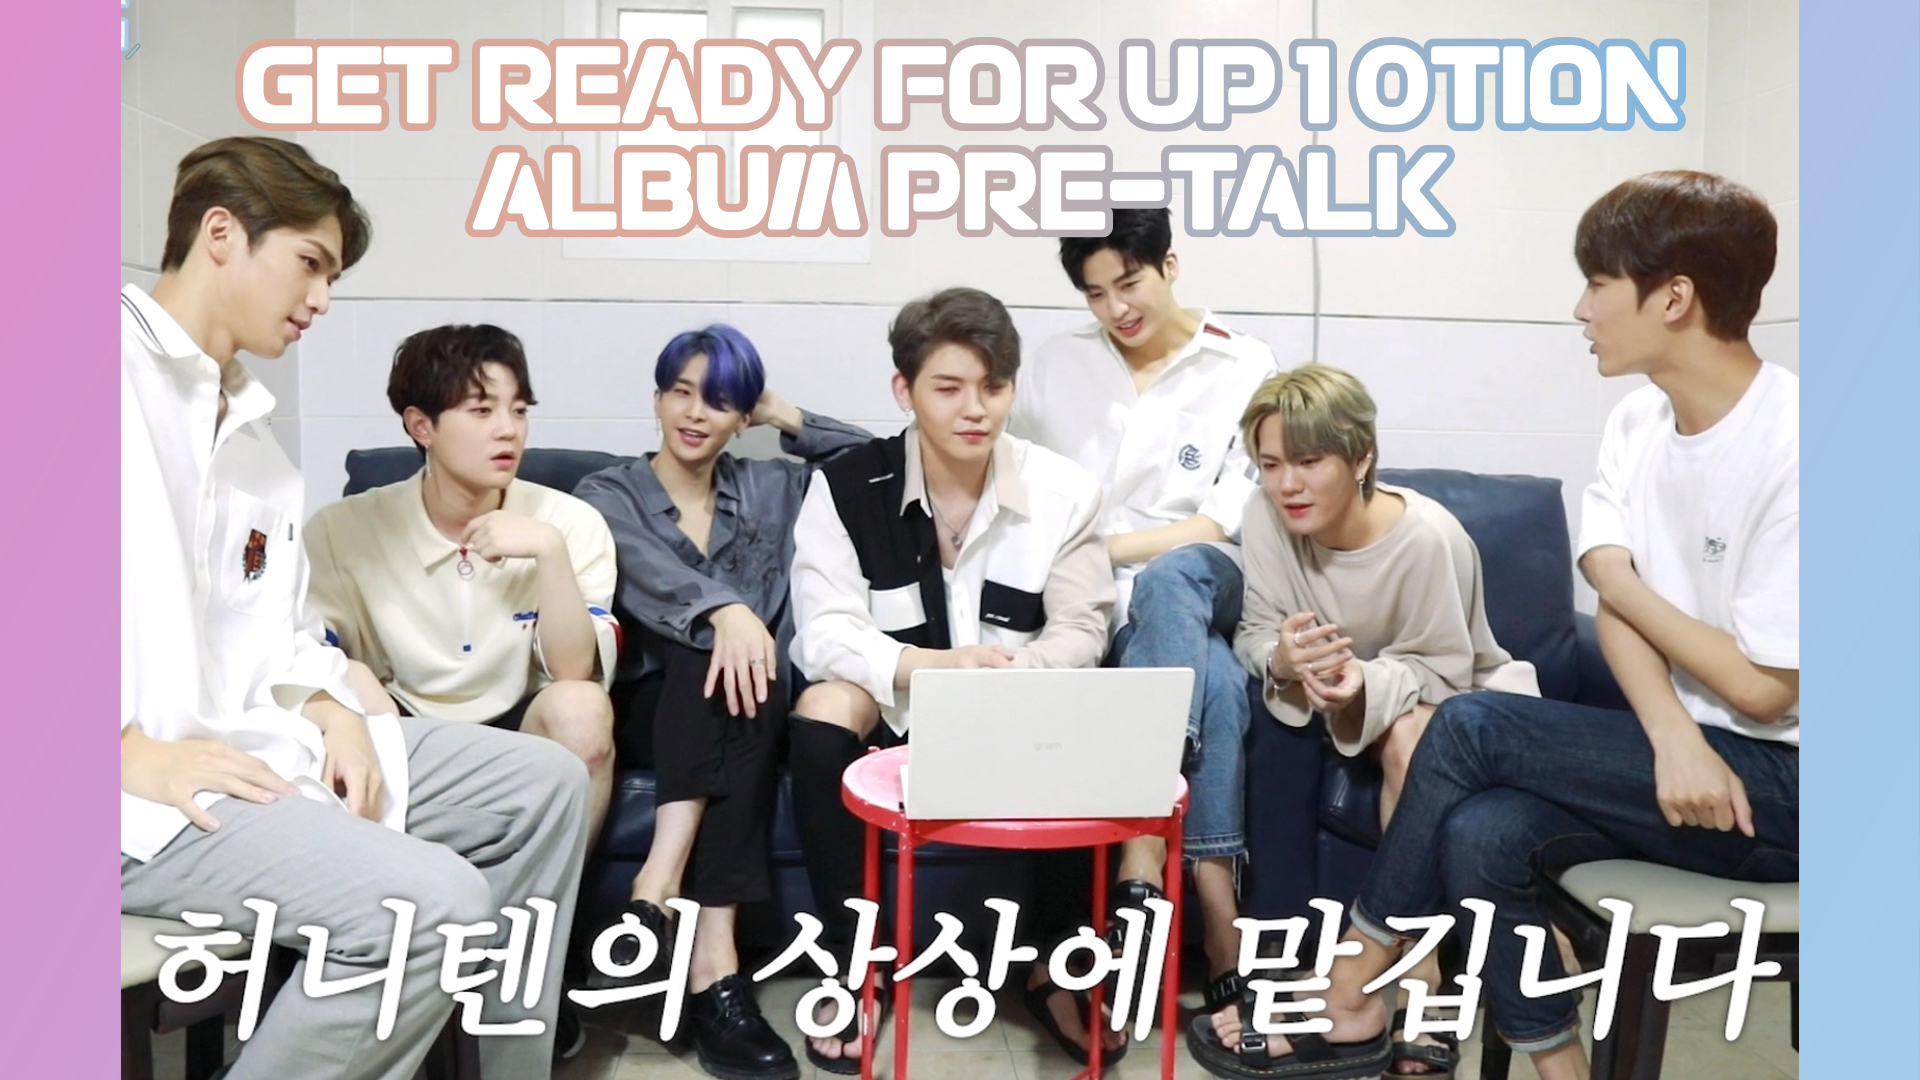 Get ready for UP10TION - ALBUM PRE-TALK